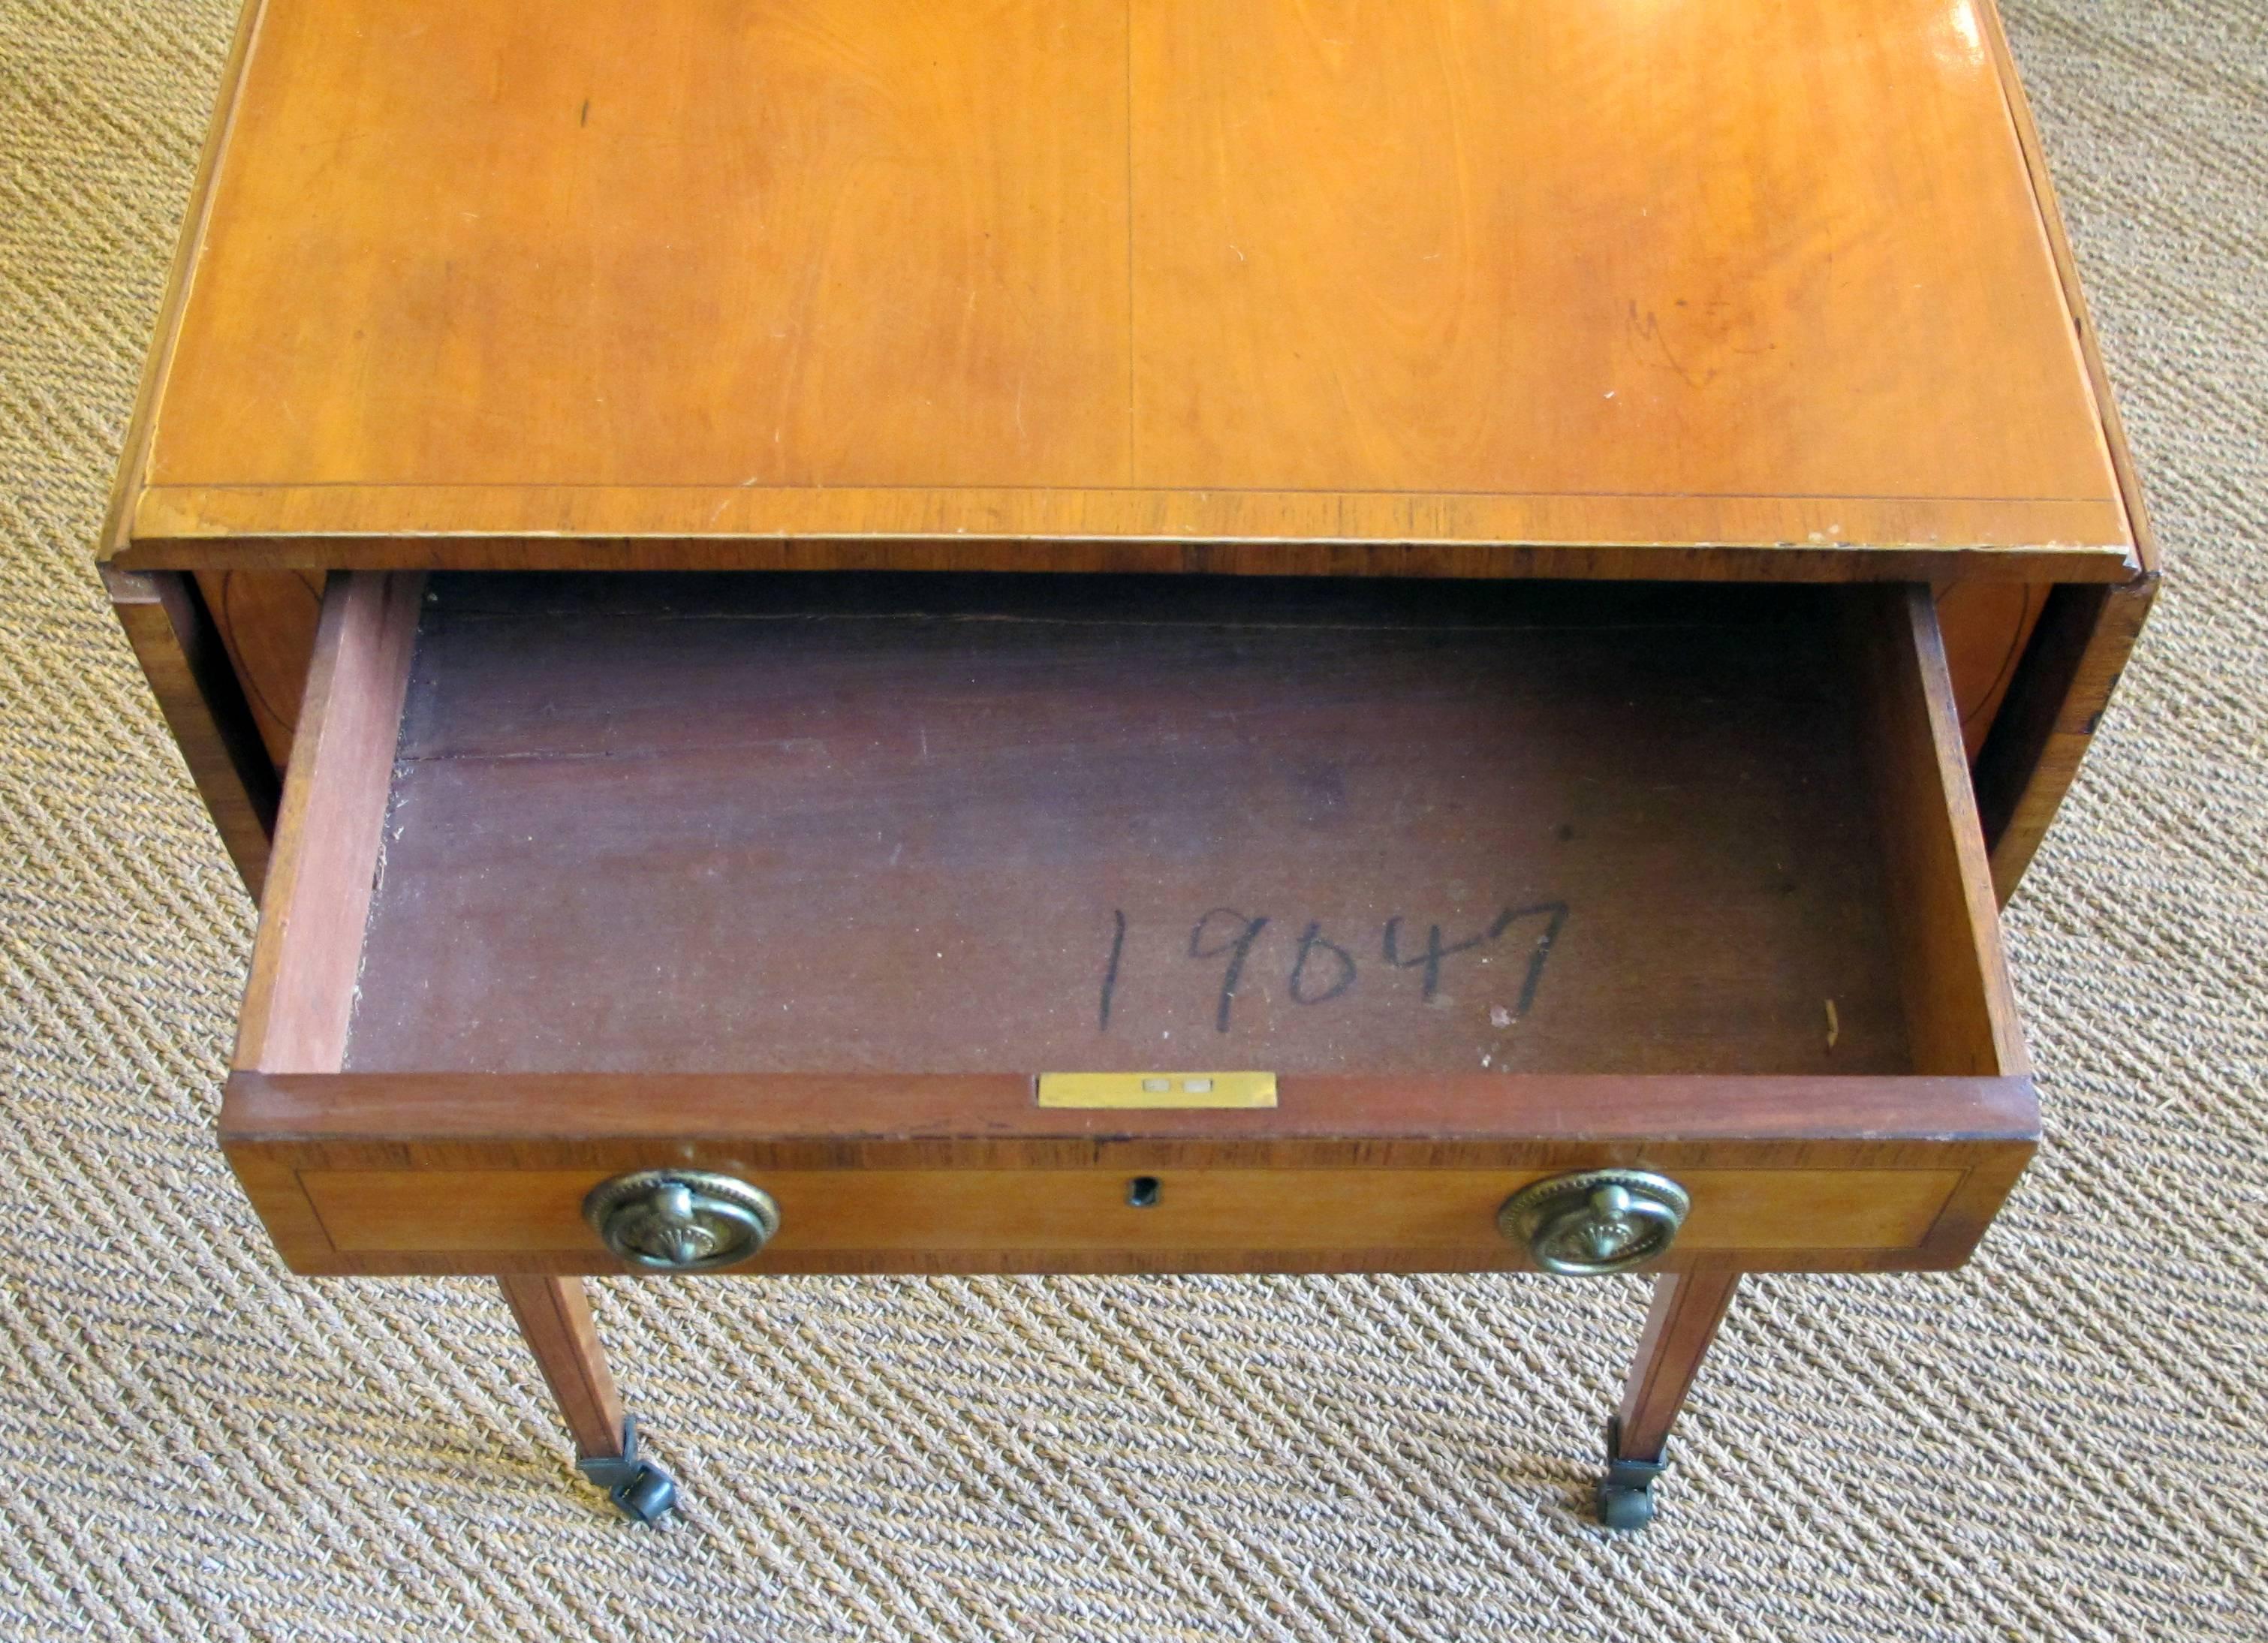 A fine English George III satinwood single-drawer D-end Pembroke table with kingwood inlay and ebony stringing, in the manner of Thomas Sheraton, the rectangular top with D-end flaps all with kingwood crossbanding, fitted with a single drawer with